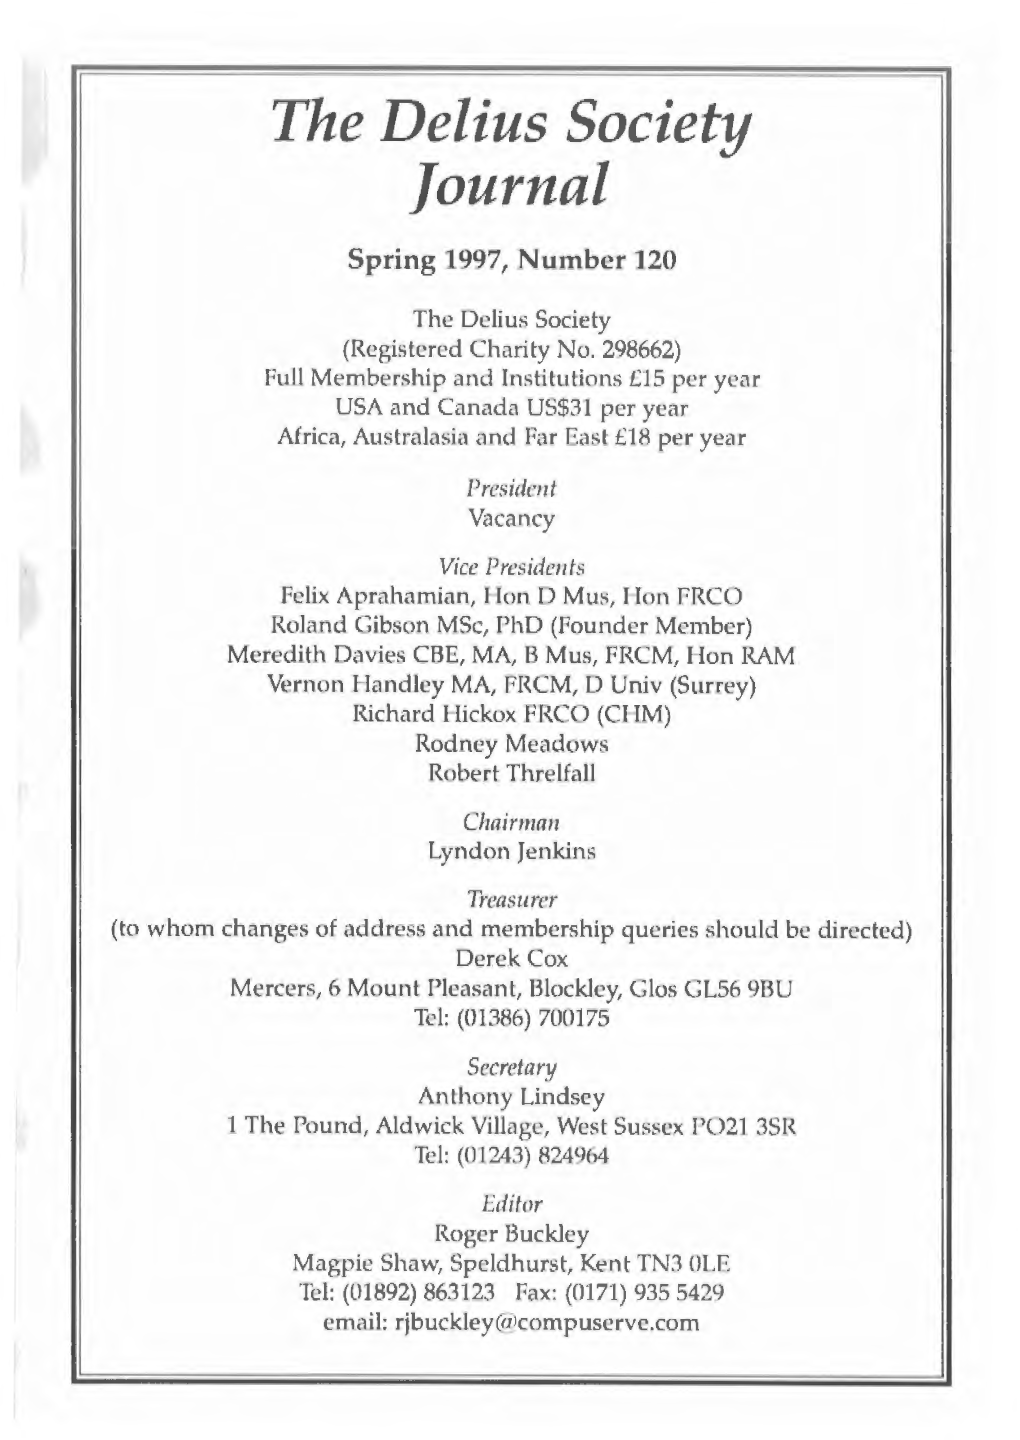 The Delius Society Journal Spring 1997, Number 120